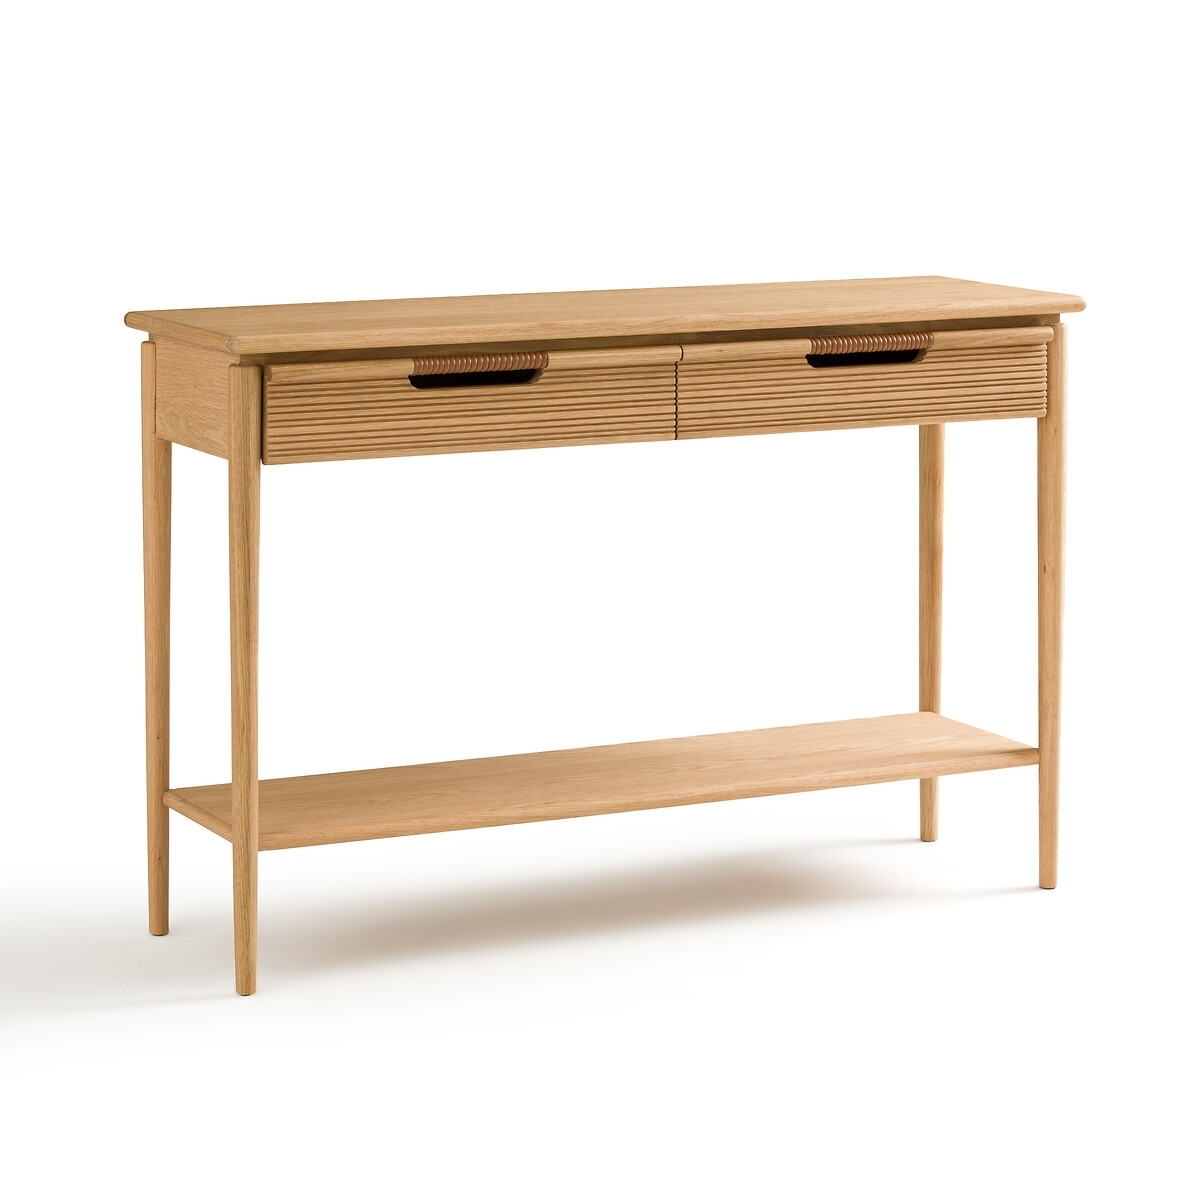 Melaly 2-Drawer Oak Console Table - image 1